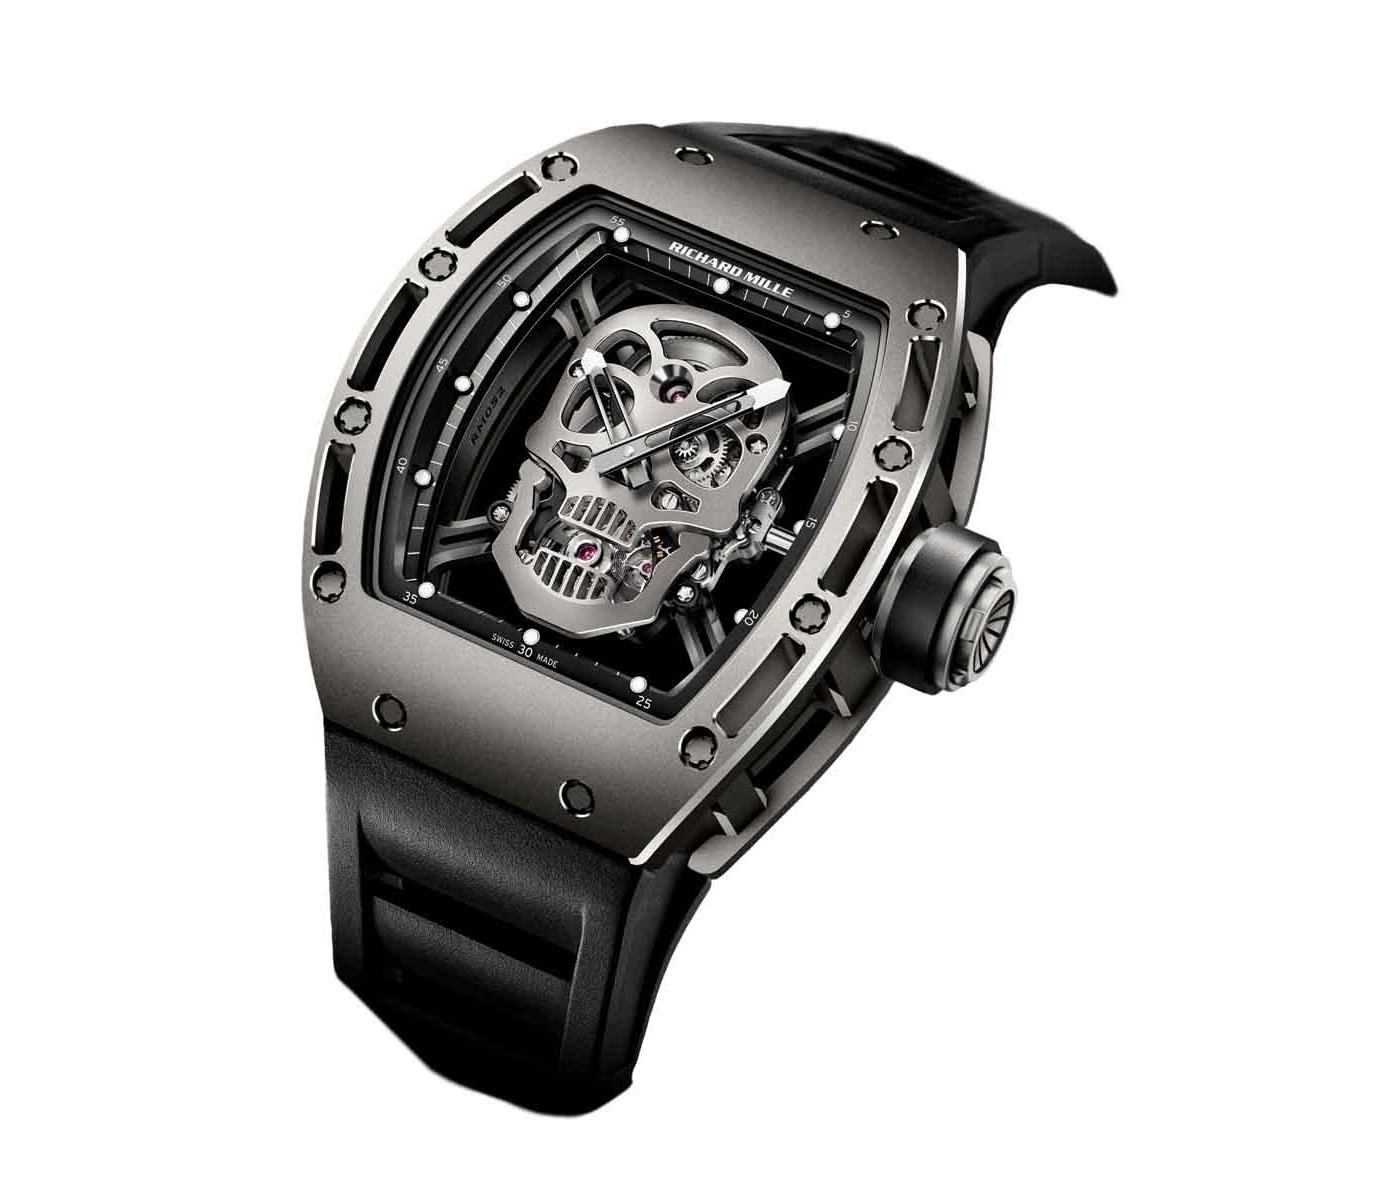 Watch by Richard Mille